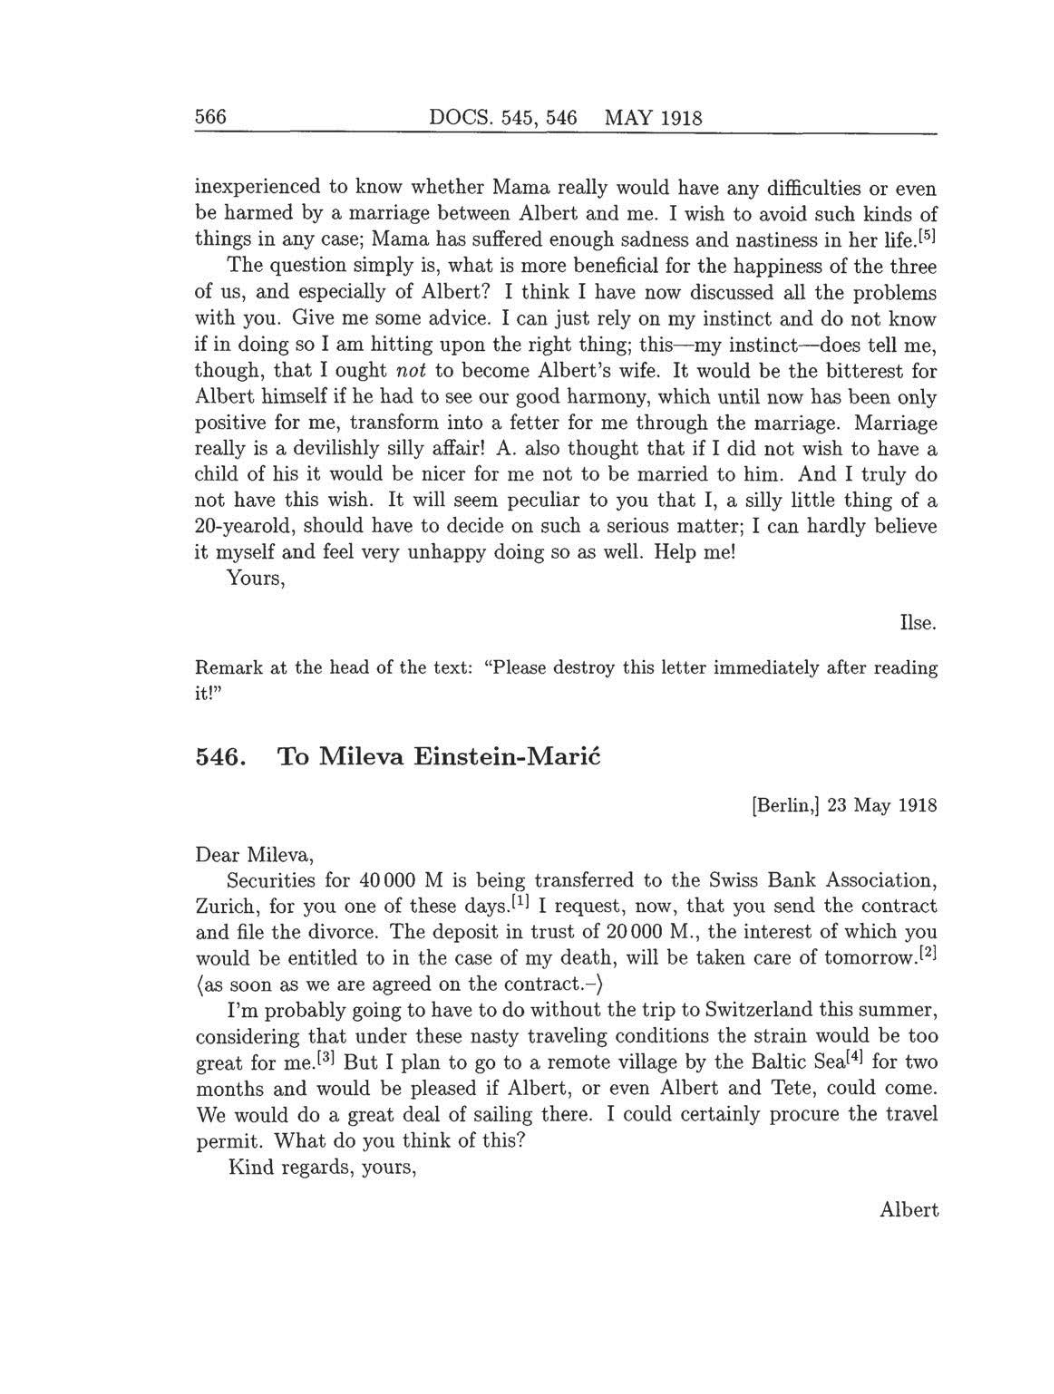 Volume 8: The Berlin Years: Correspondence, 1914-1918 (English translation supplement) page 566